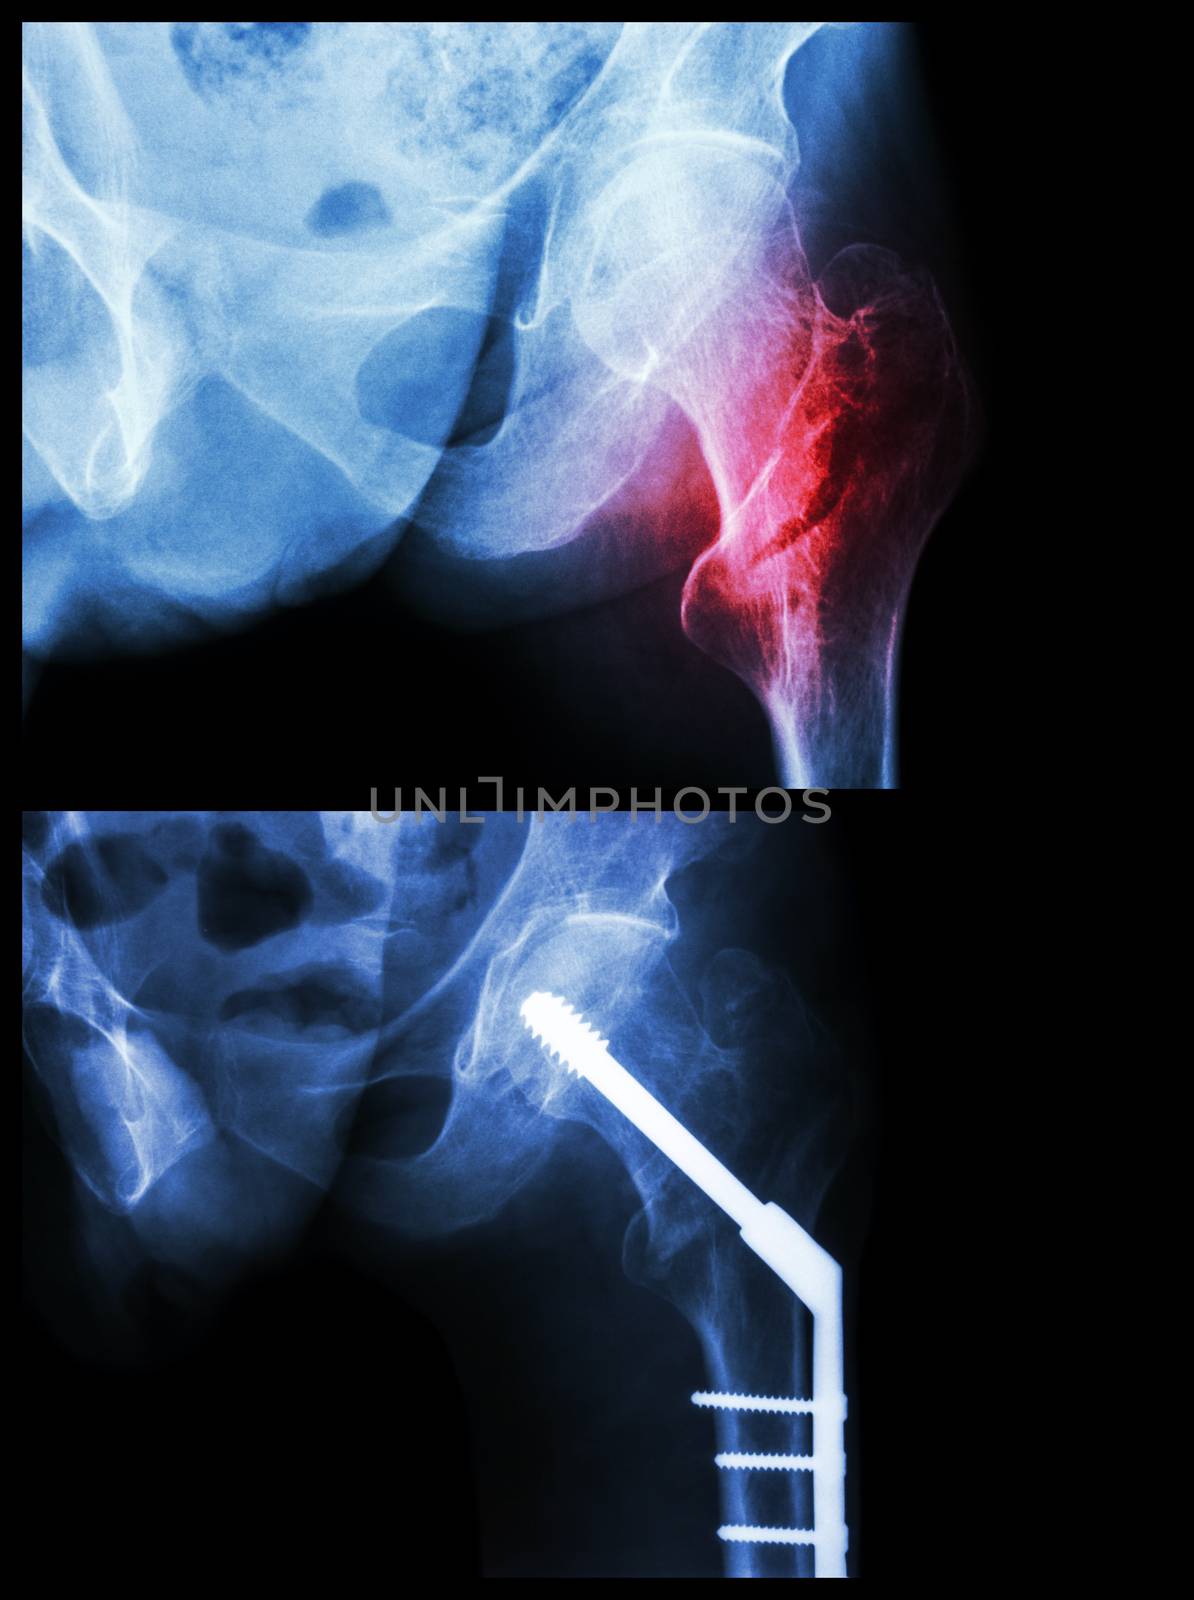 Intertrochanteric fracture left femur (fracture thigh's bone). It was operated and inserted intramedullary nail.